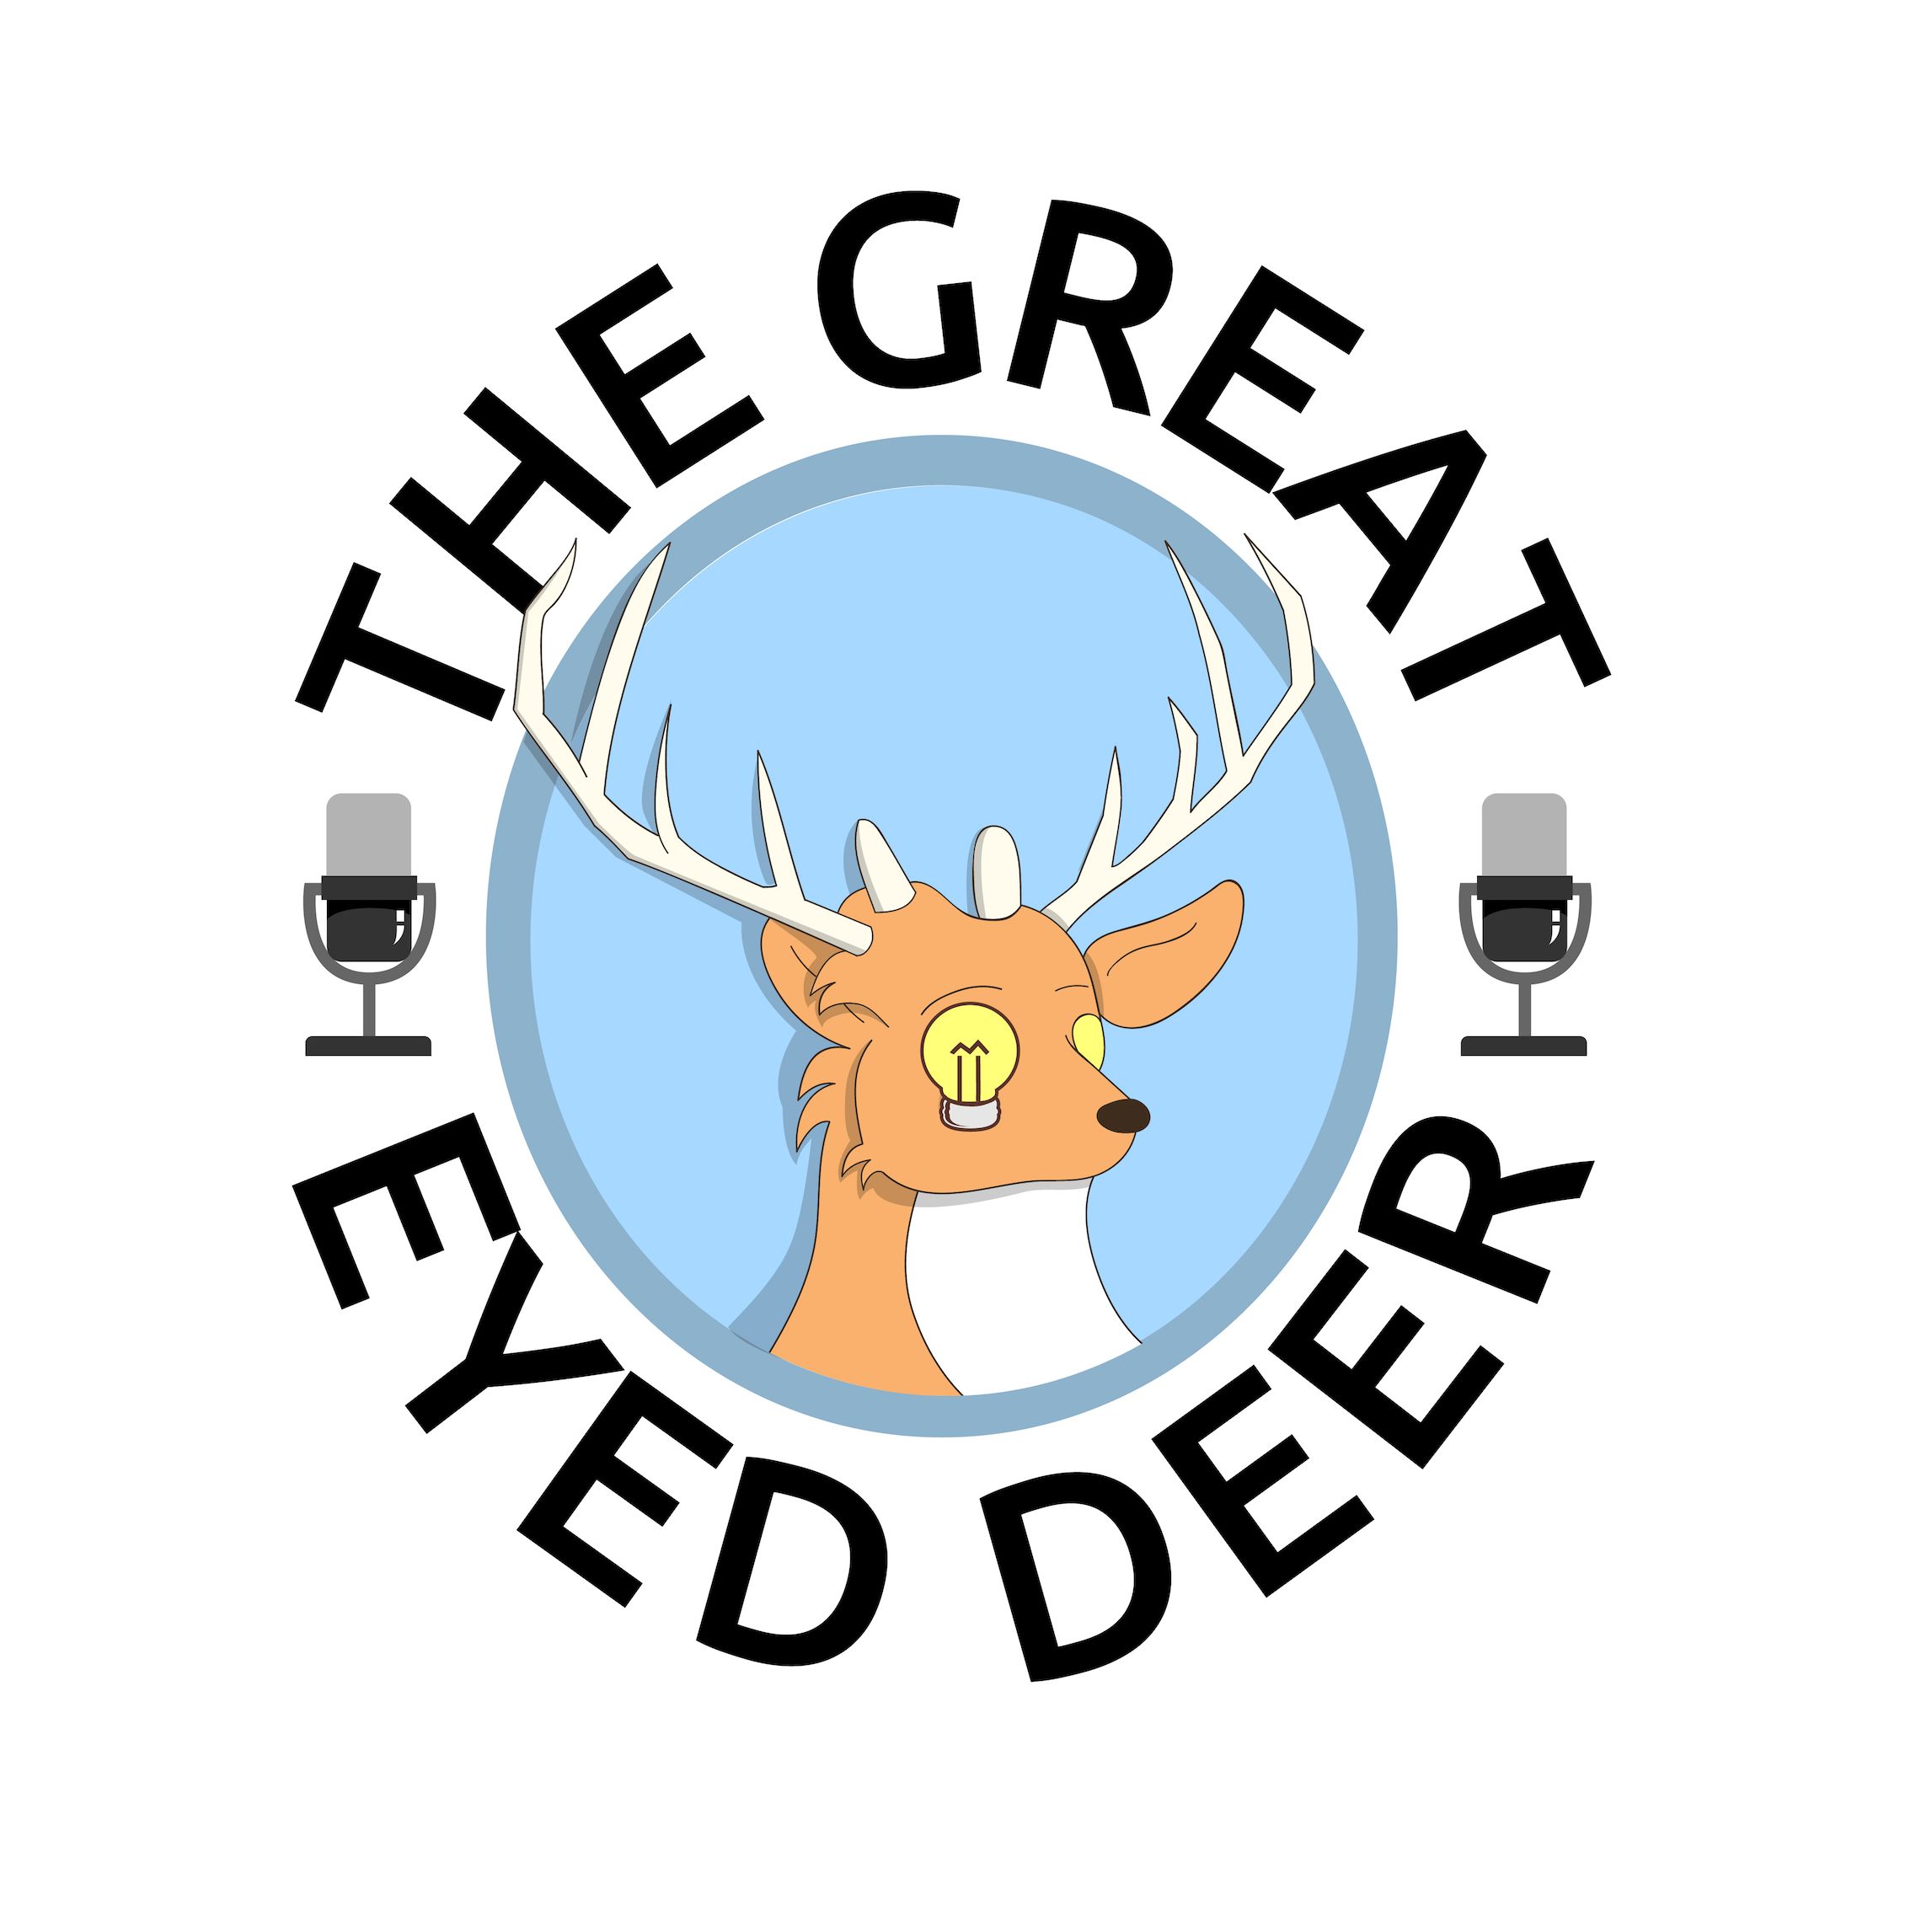 The Great Eyed Deer